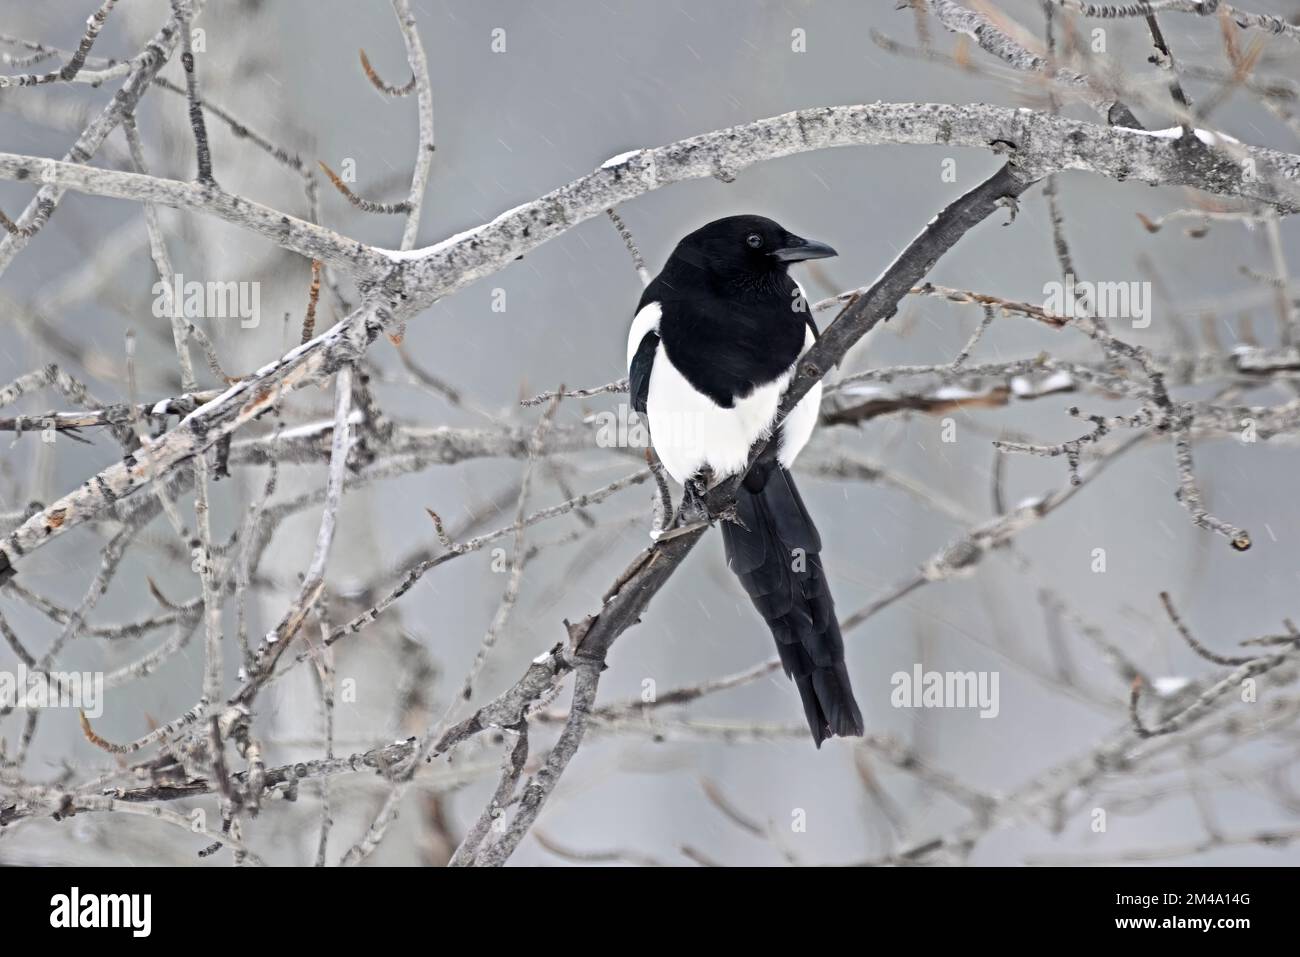 A Black-billed Magpie 'Pica pica', perched in some bushes during a snow storm in rural Alberta Canada. Stock Photo